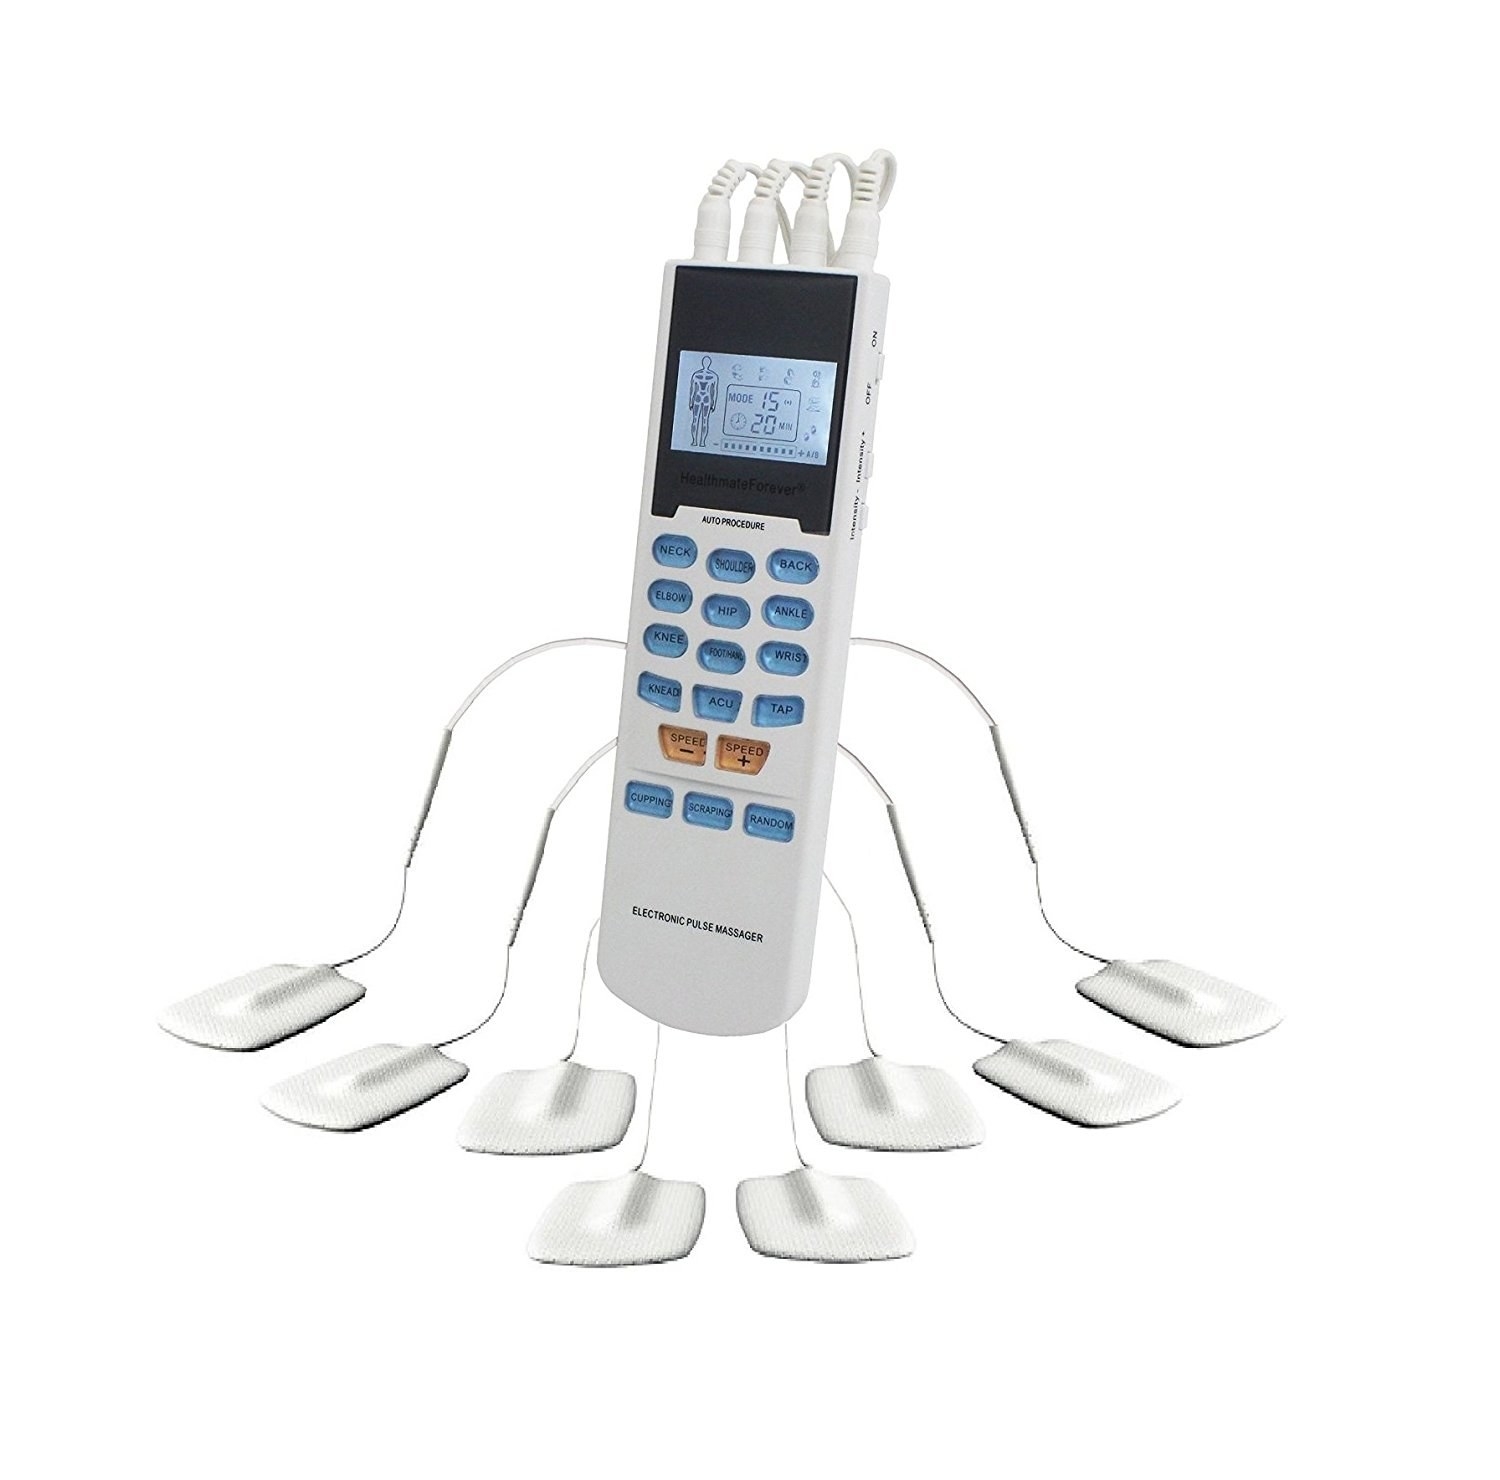 A TENS unit to provide electrical stimulation to your tight muscles that may help them to loosen up and hurt less It looks a little intimidating